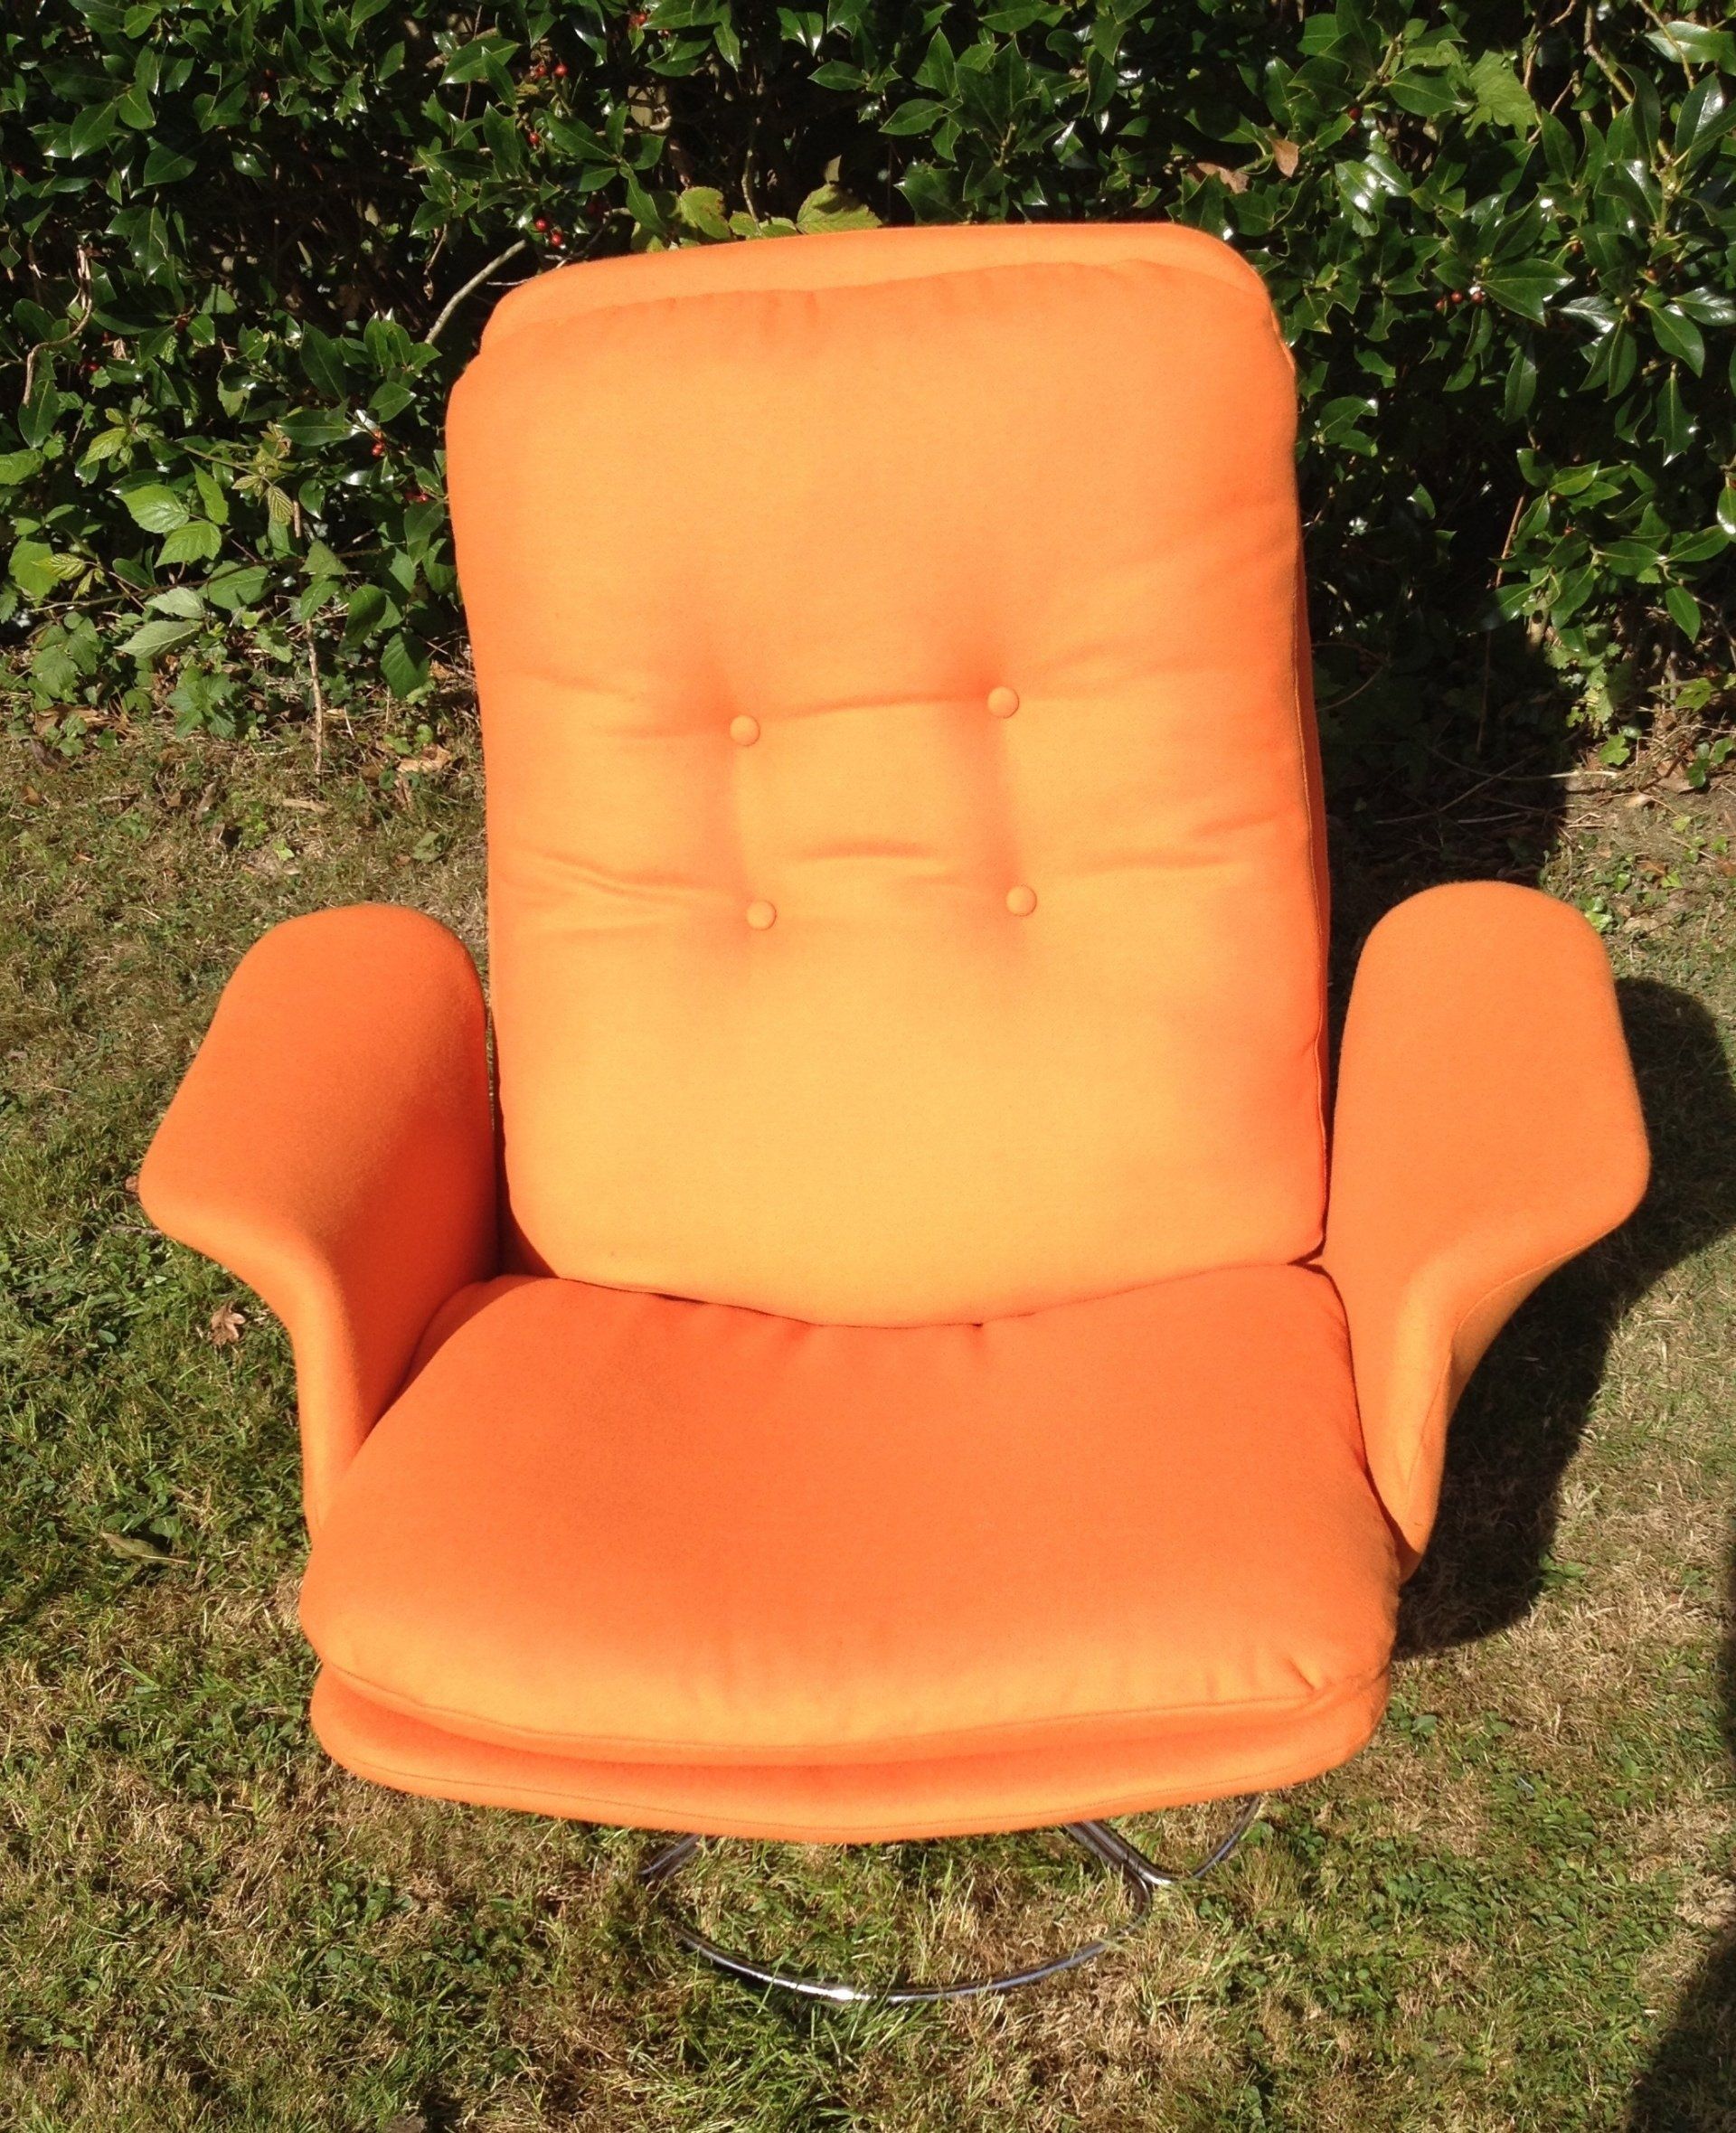 1970S VINTAGE RETRO SWIVELCHAIR WITH CHROME FOOT